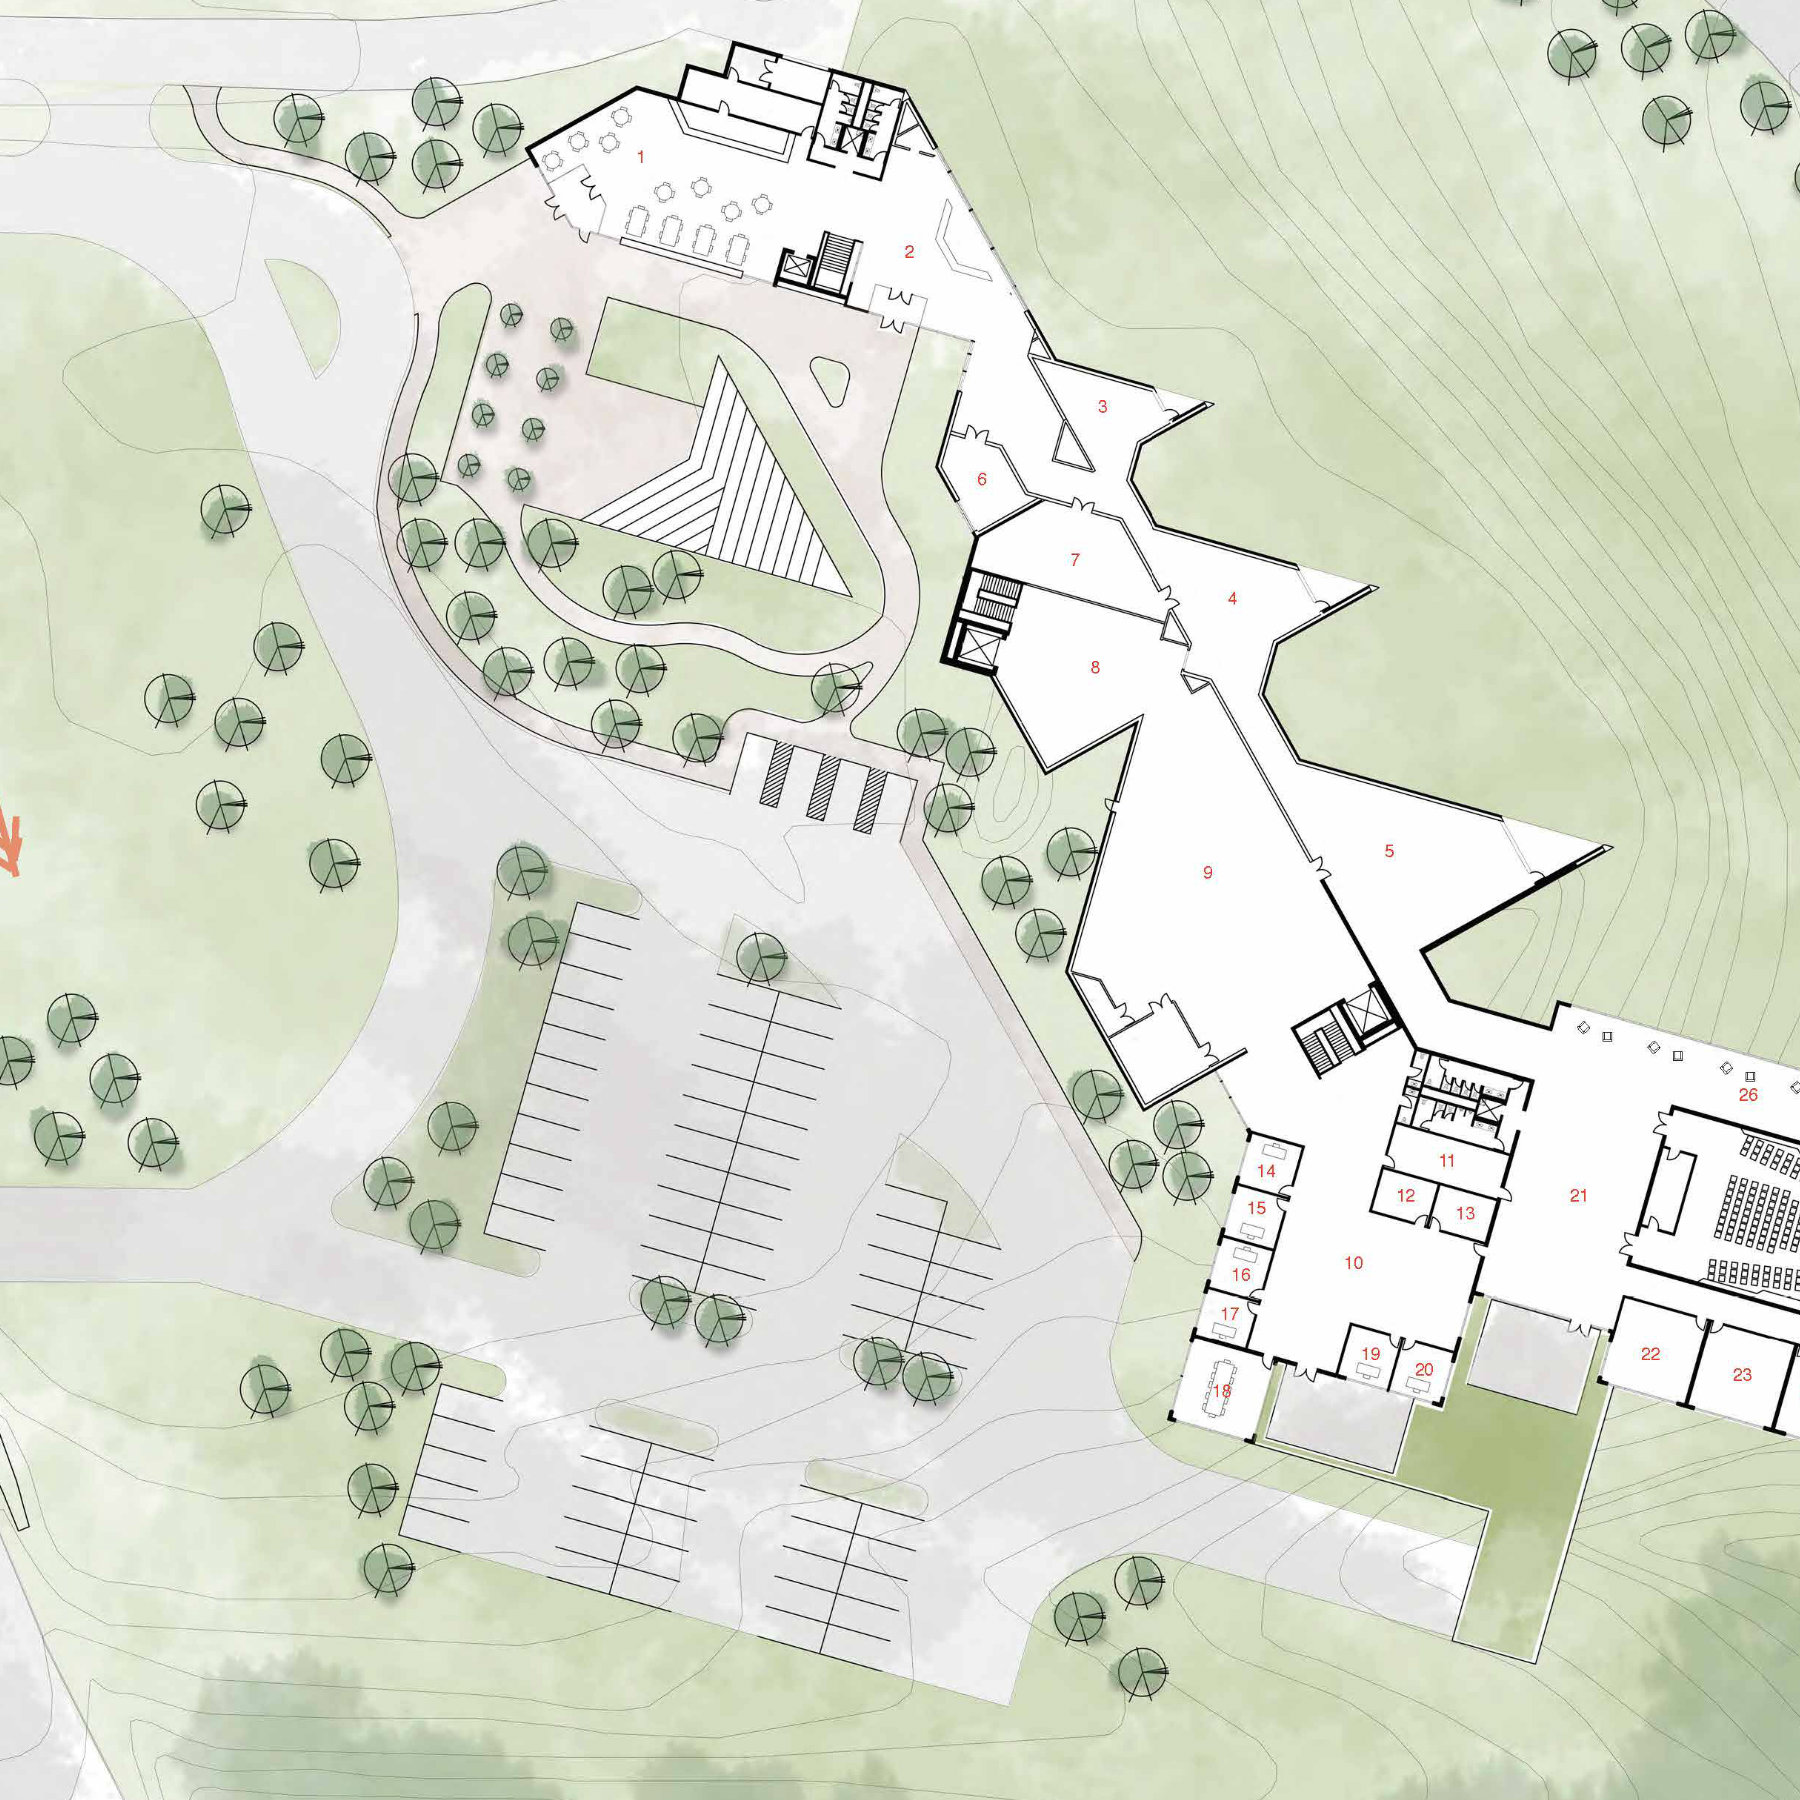 drawing of a site plan with building, green space and parking area